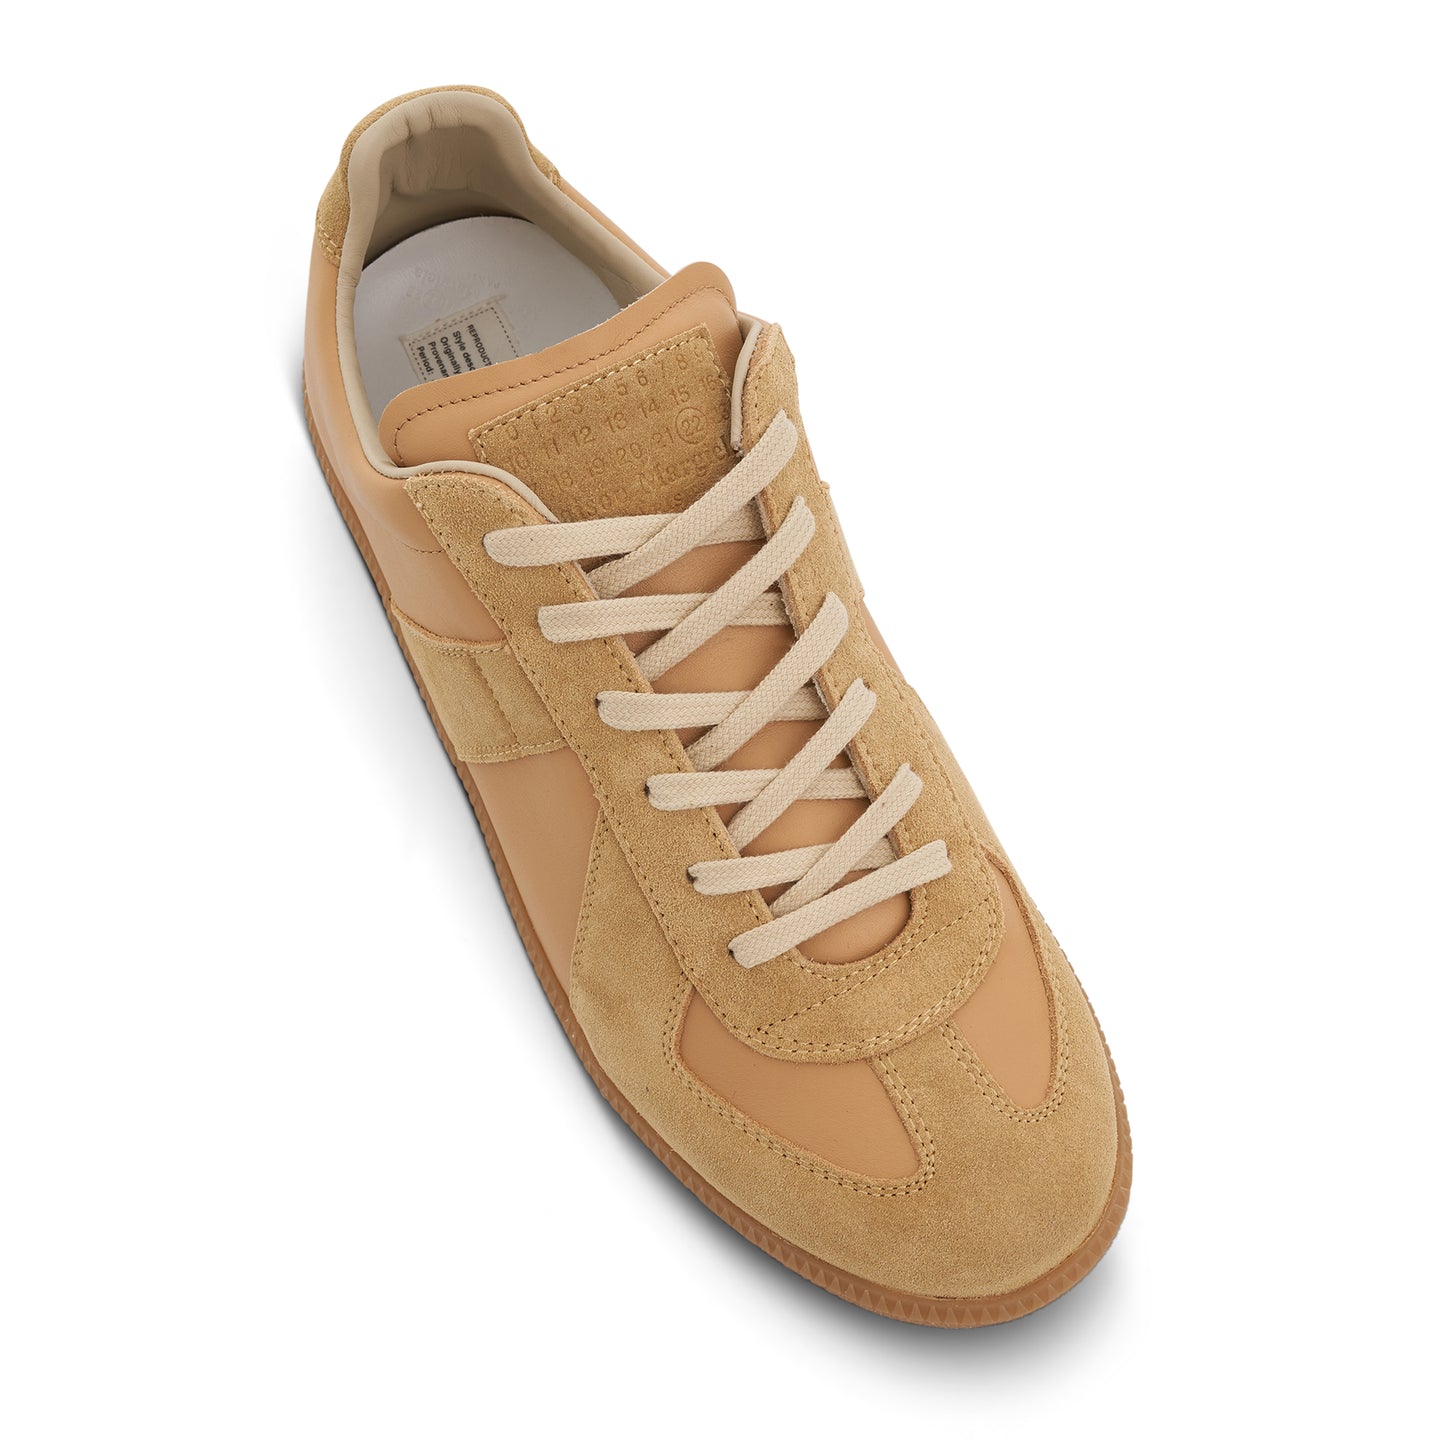 Replica Leather Sneakers in Champagne